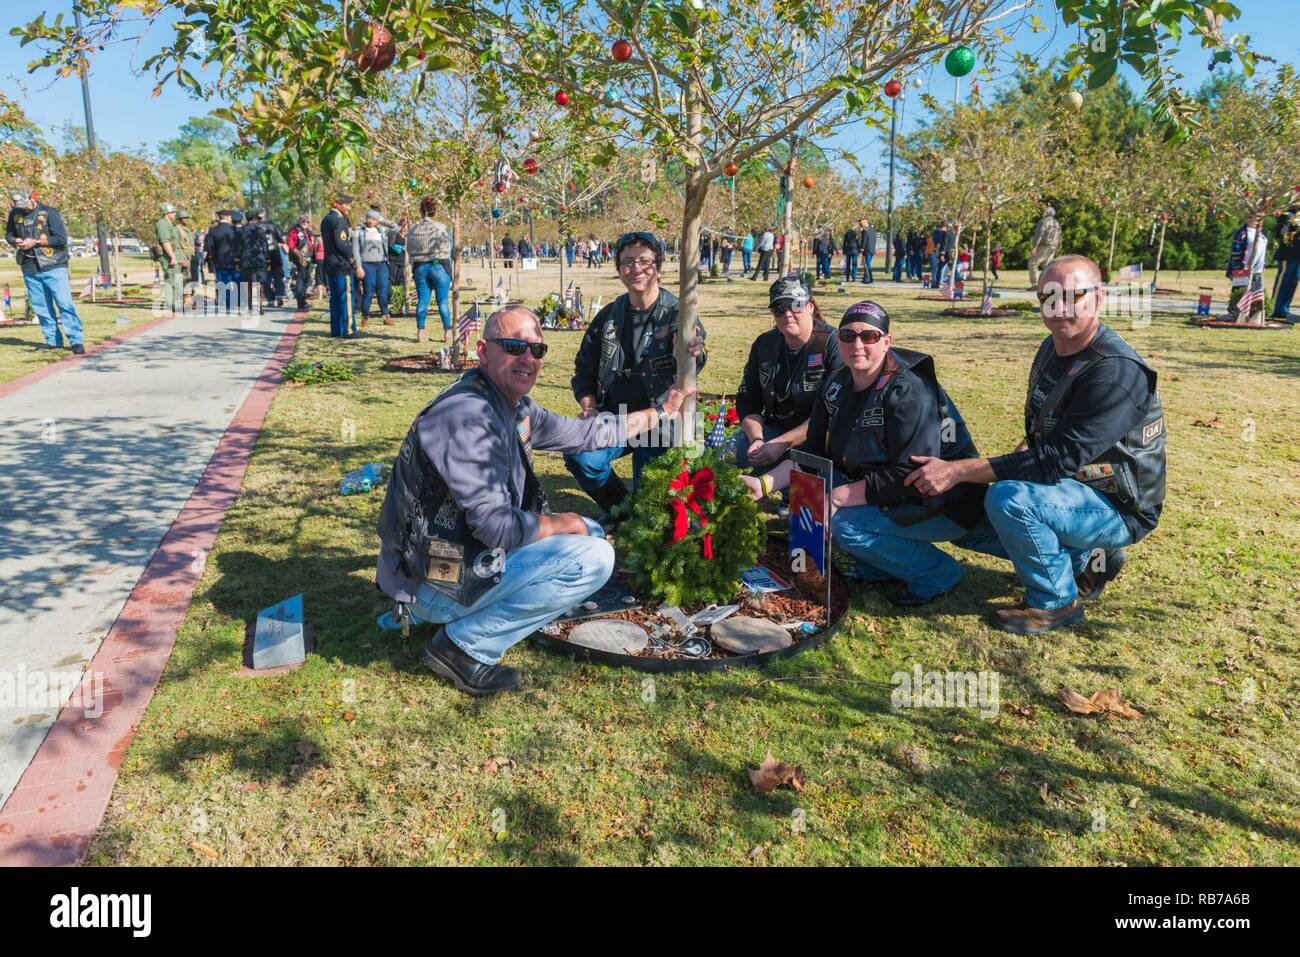 Members of the U.S. Military Vets motorcycle club of Surrency, Ga. honor Spc. Christian M. Neff at Tree # 373 following the Wreaths for Warriors Walk ceremony at Fort Stewart Dec. 17, 2016. U.S. Army Sgt. Maj. Jeff Logan (left) is from Spc. Neff's hometown in Ohio and is visiting the memorial in place of Neff's parents who could not be there. Stock Photo